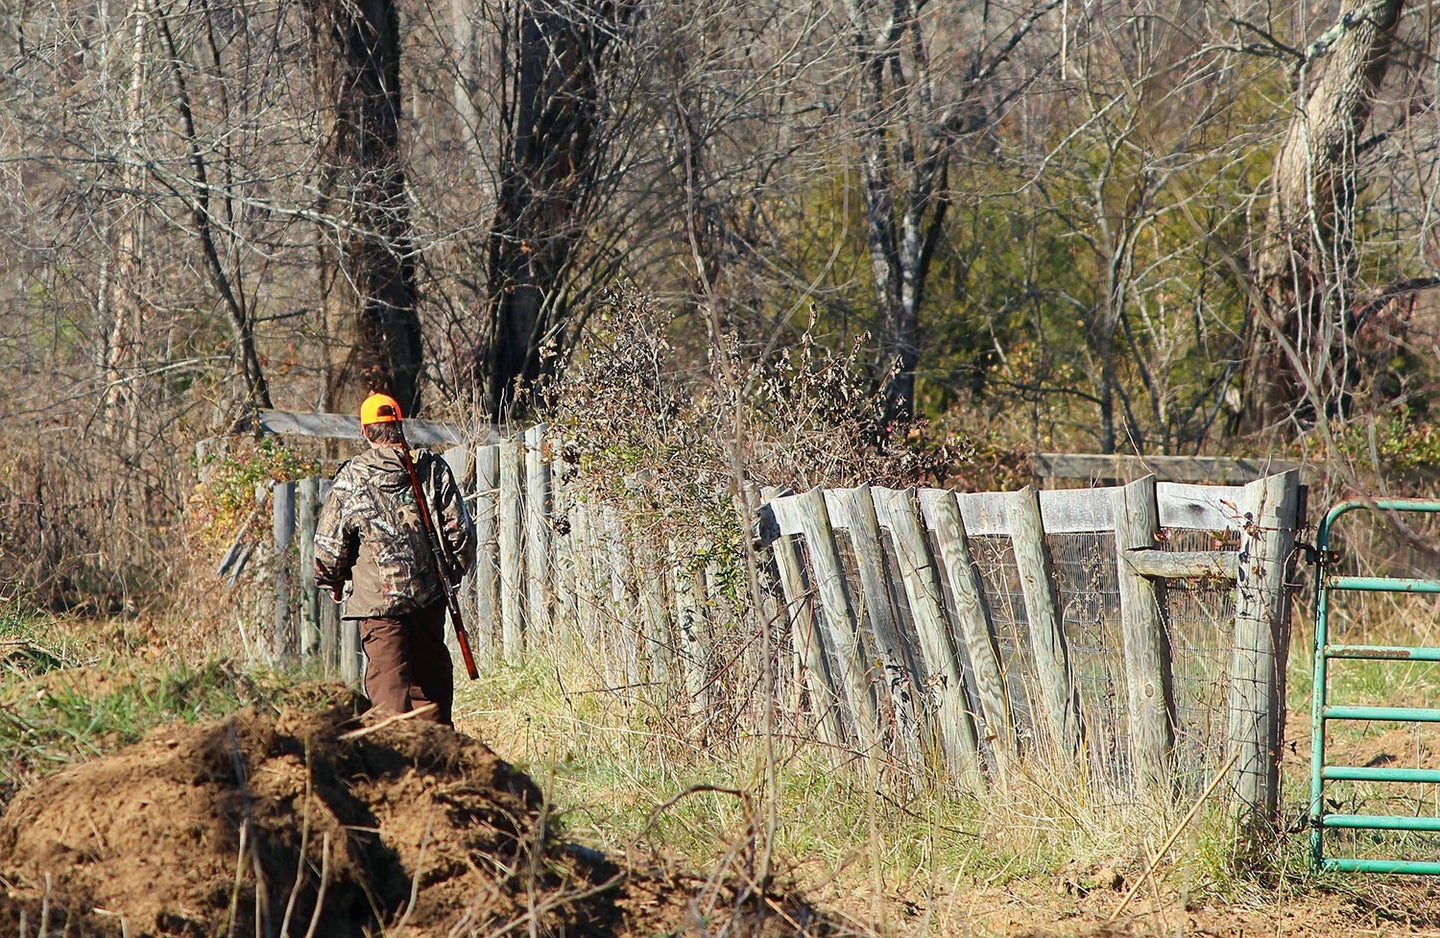 A hunter walking on a fence line with a rifle over their shoulder.